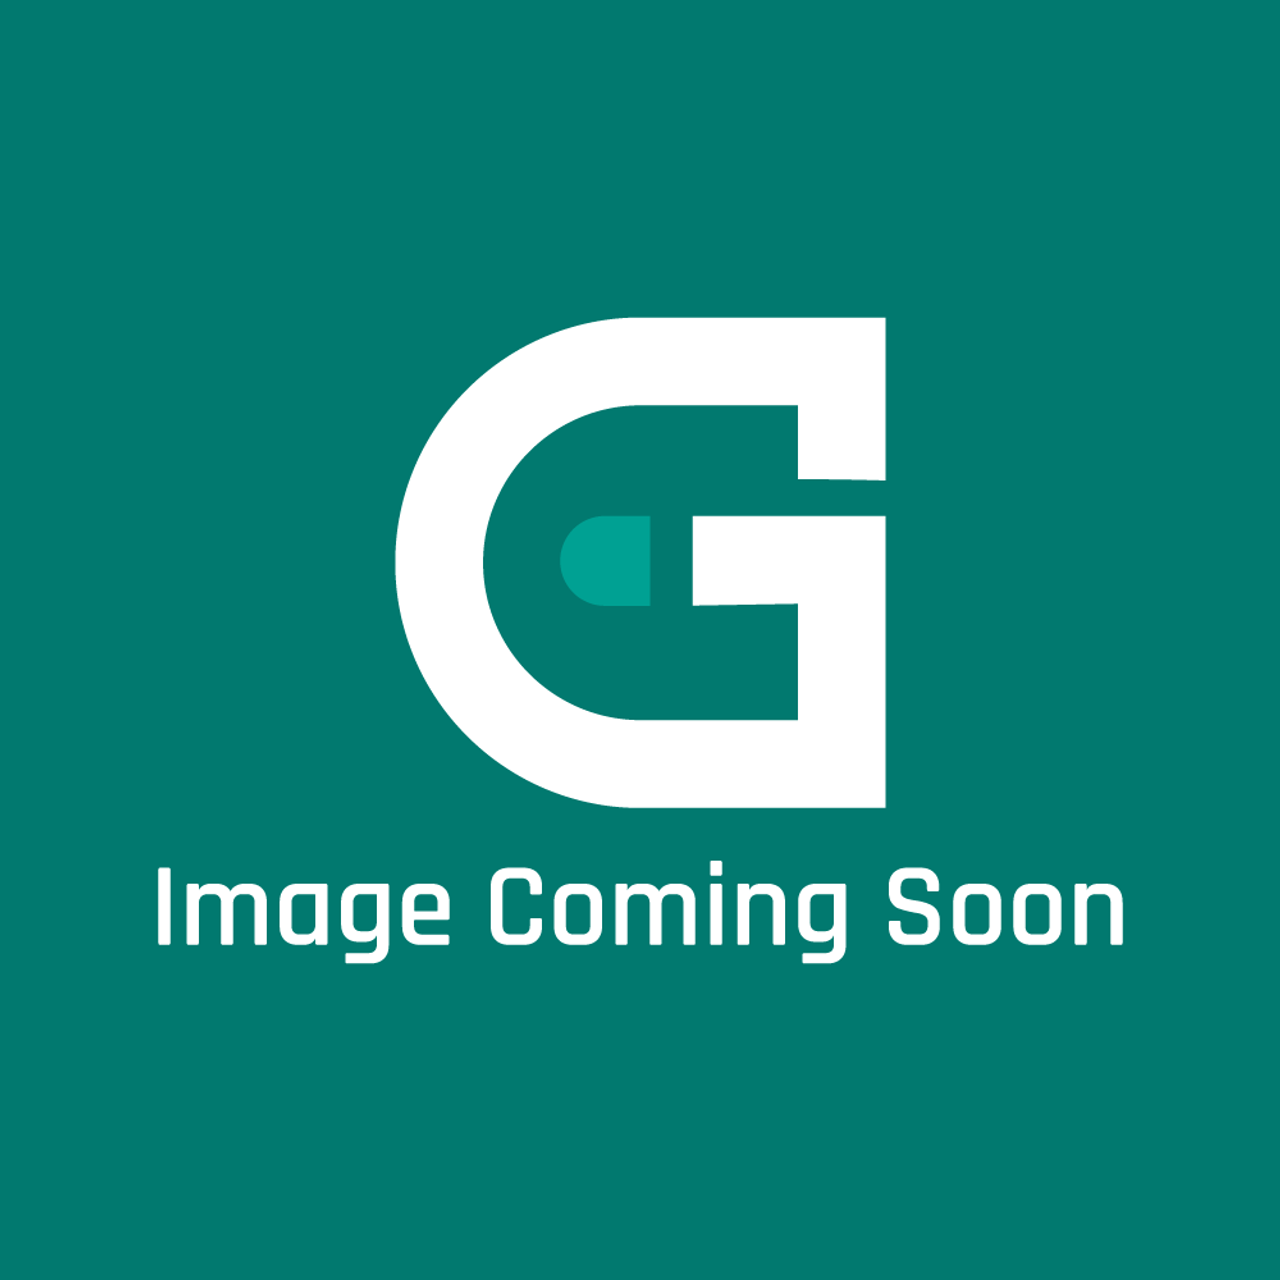 Frigidaire - Electrolux 318329620 - Induction Generator - Image Coming Soon!